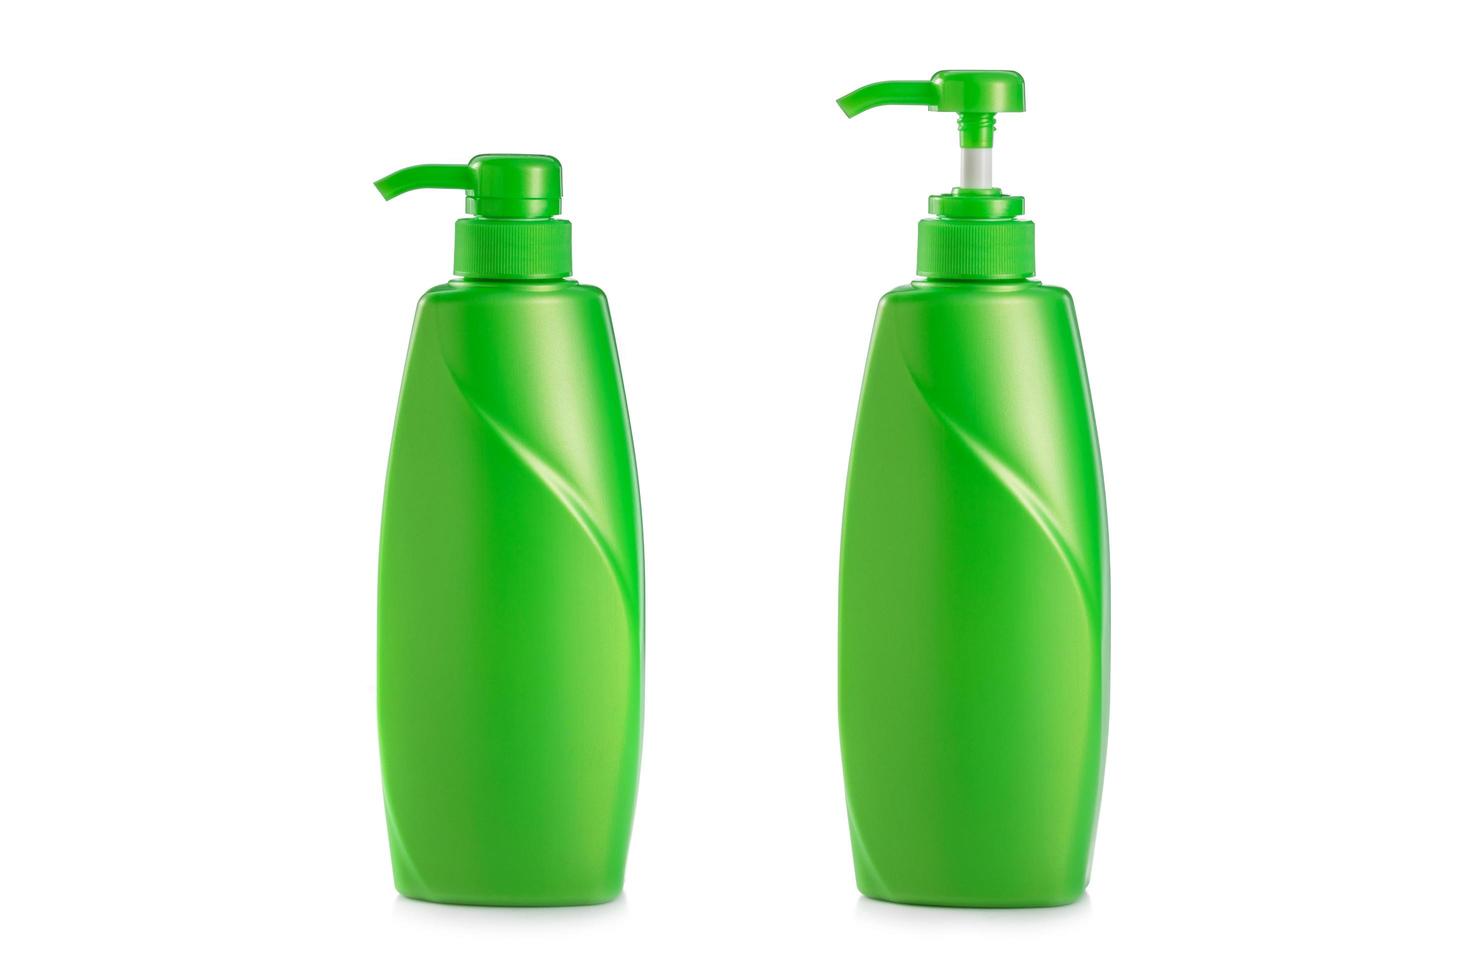 Blank green plastic pump bottle used for shampoo or soap. Studio shot isolated on white photo